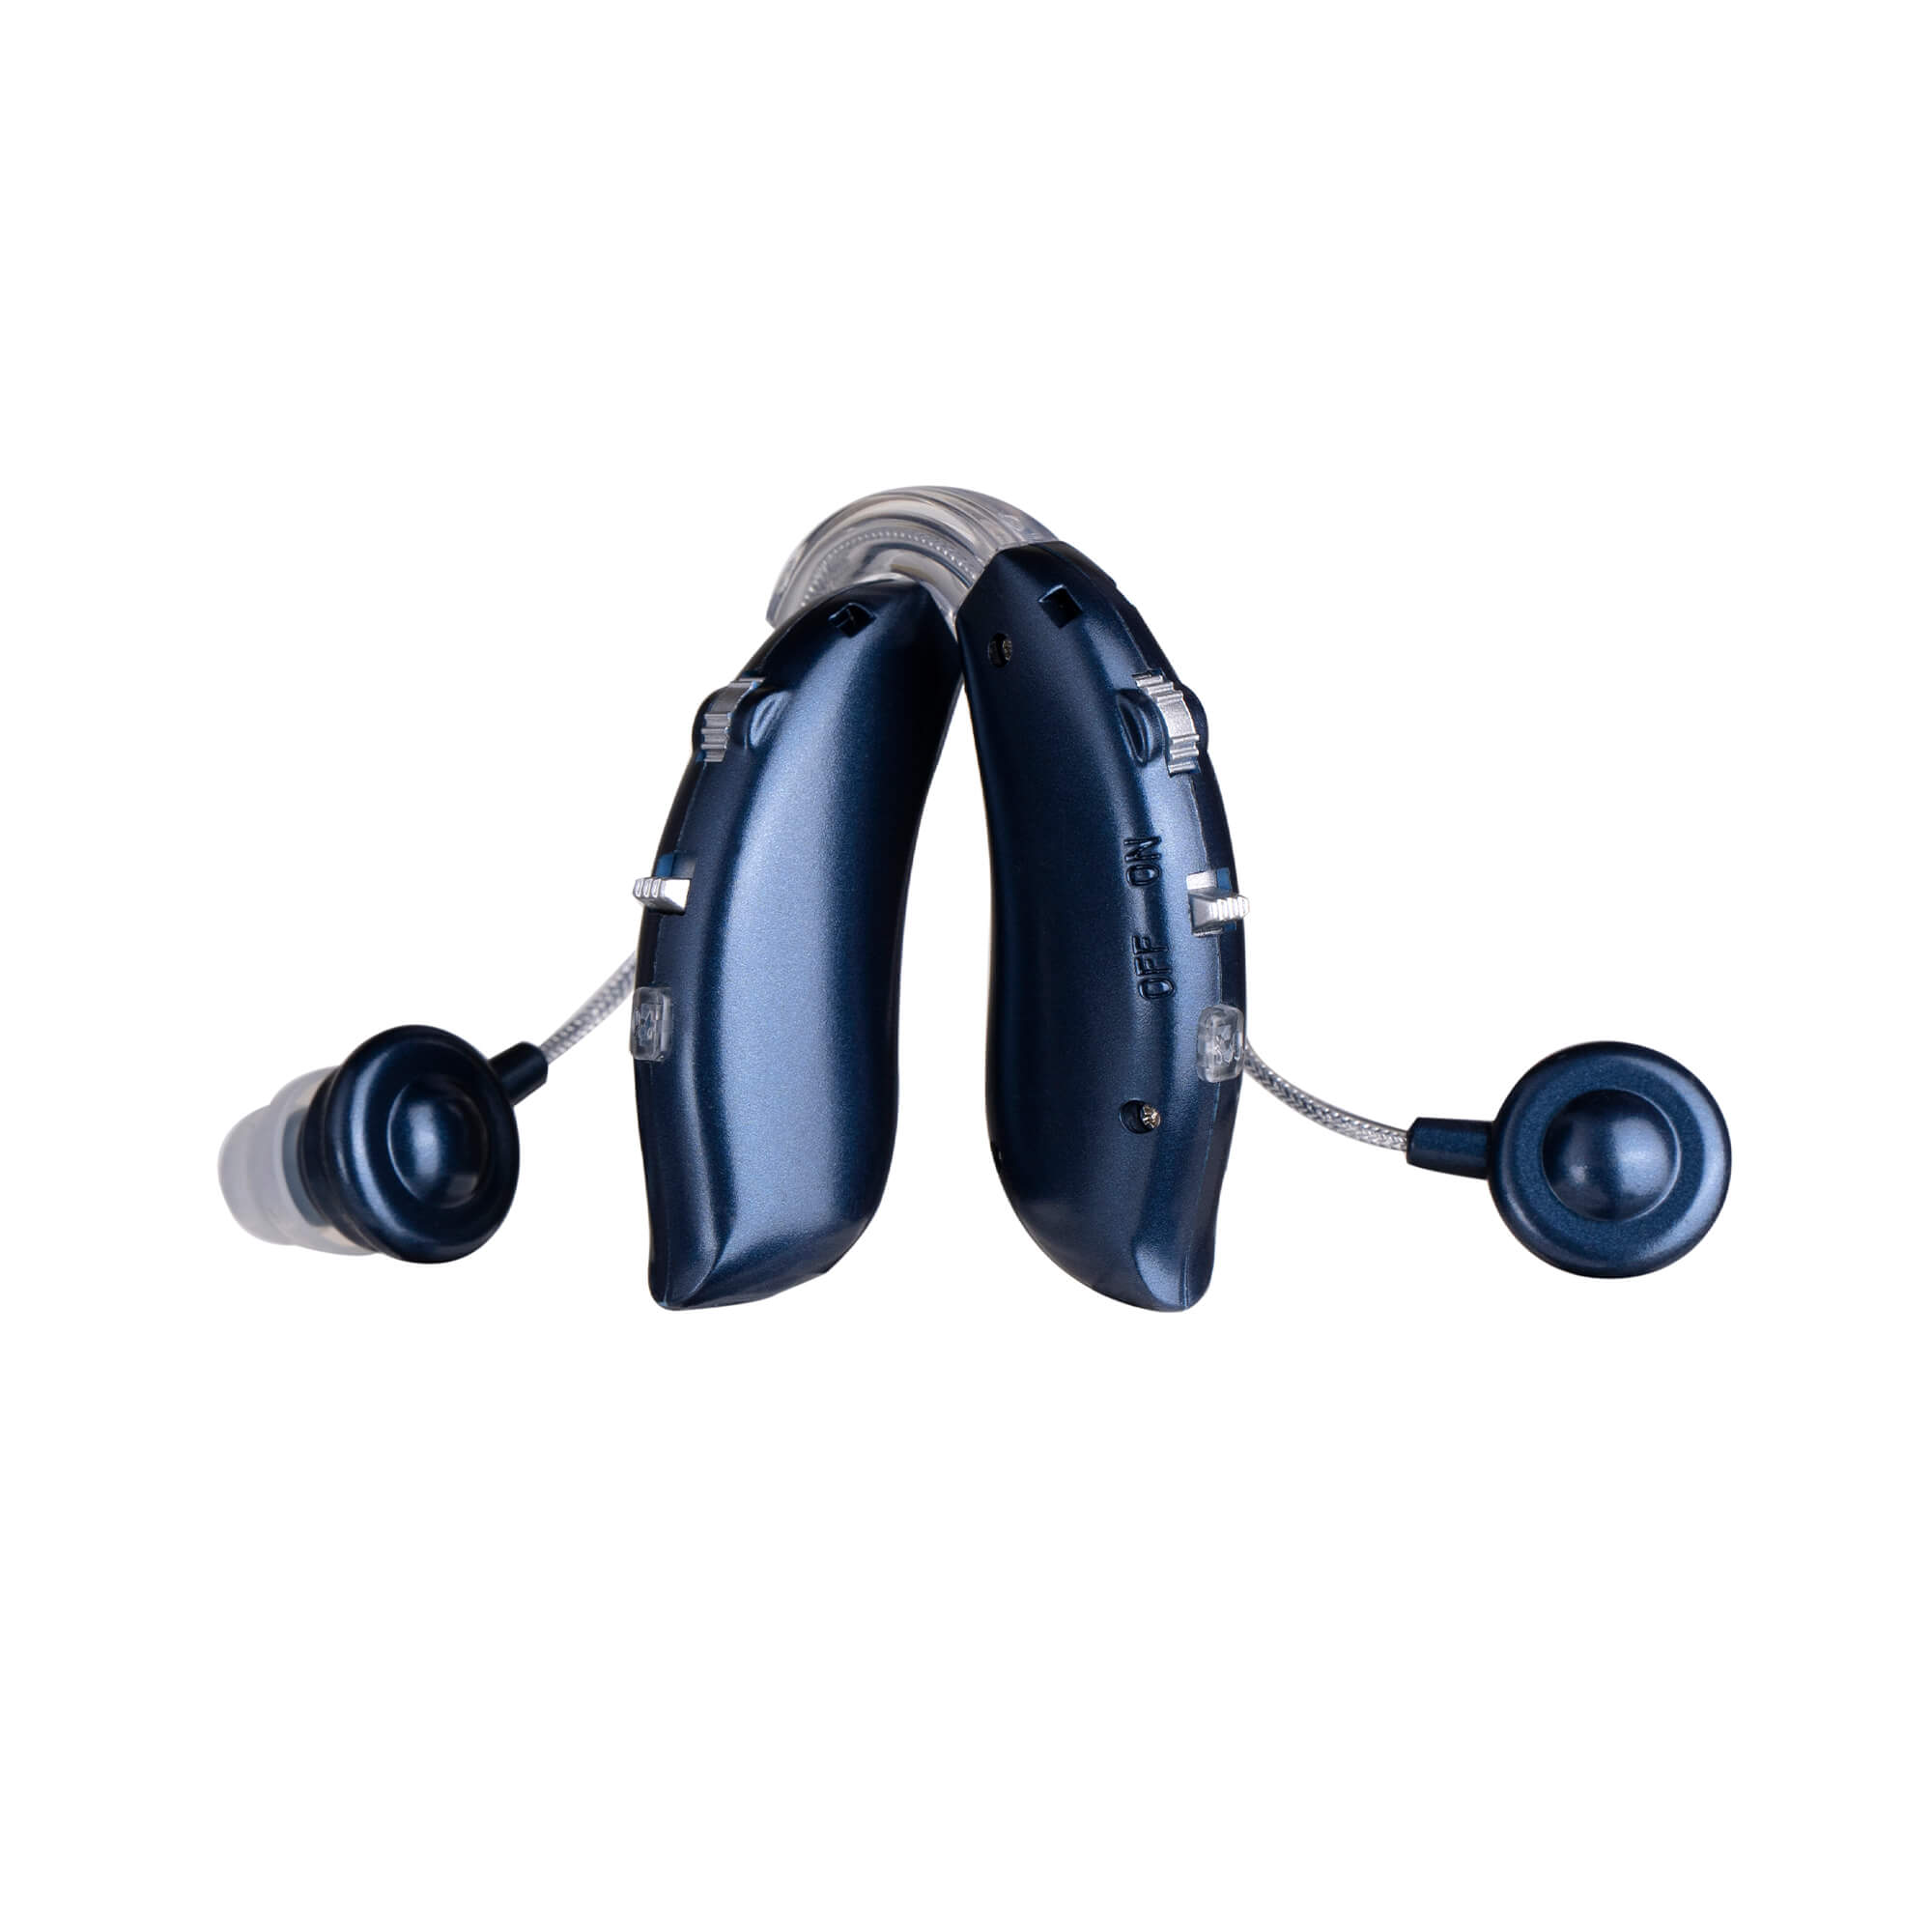 Fisdemo J Bluetooth Hearing Aids for Seniors Adults to Enjoy hand-free Phone Calls/Music/TV featured with RIC and DSP Chip for Clear Sound